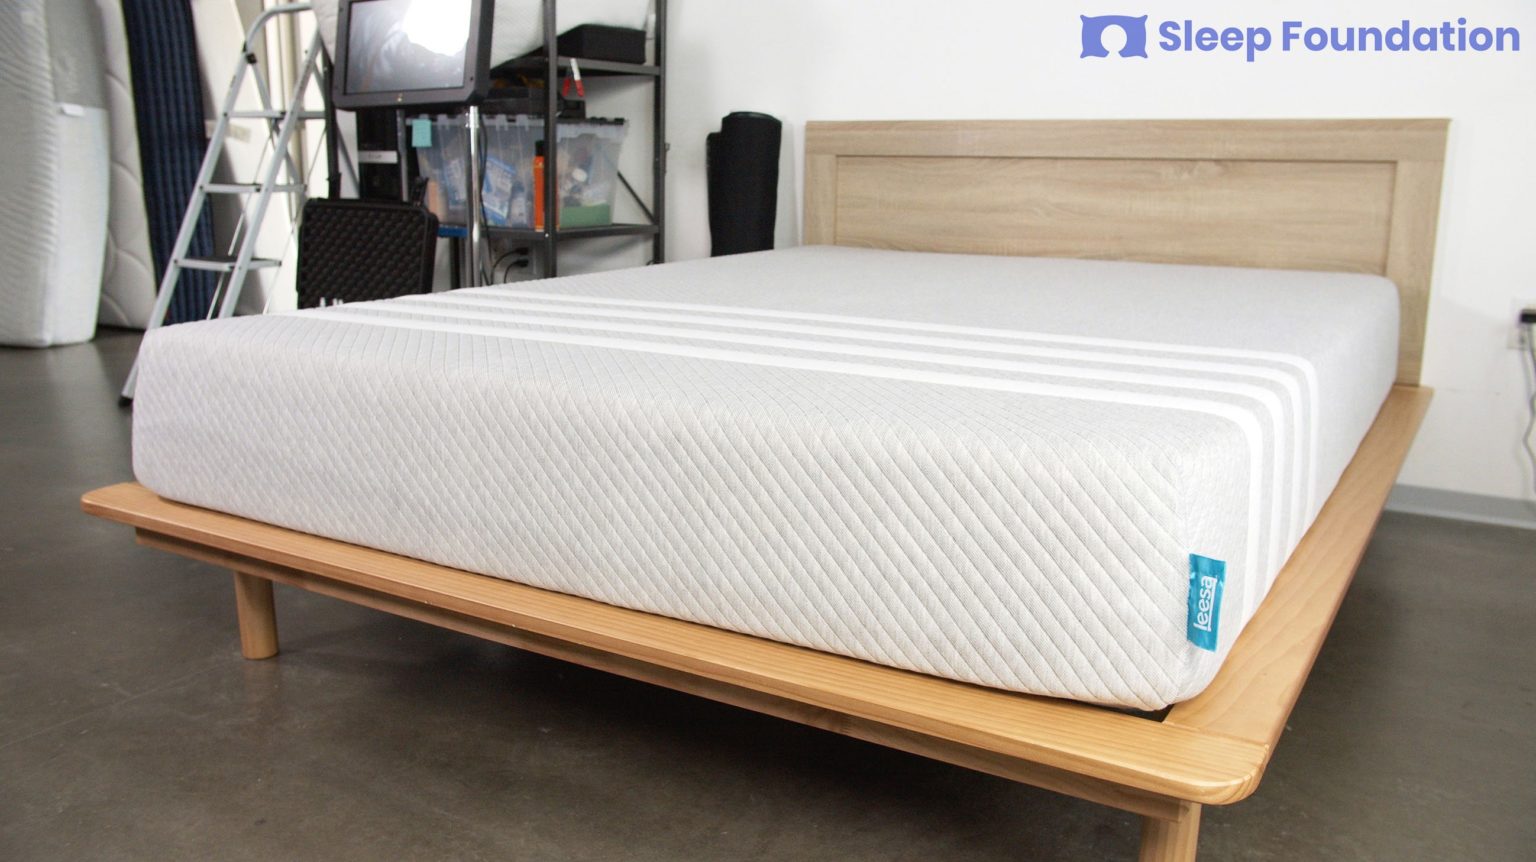 A picture of the Leesa Original Mattress in Sleep Foundation's test lab.